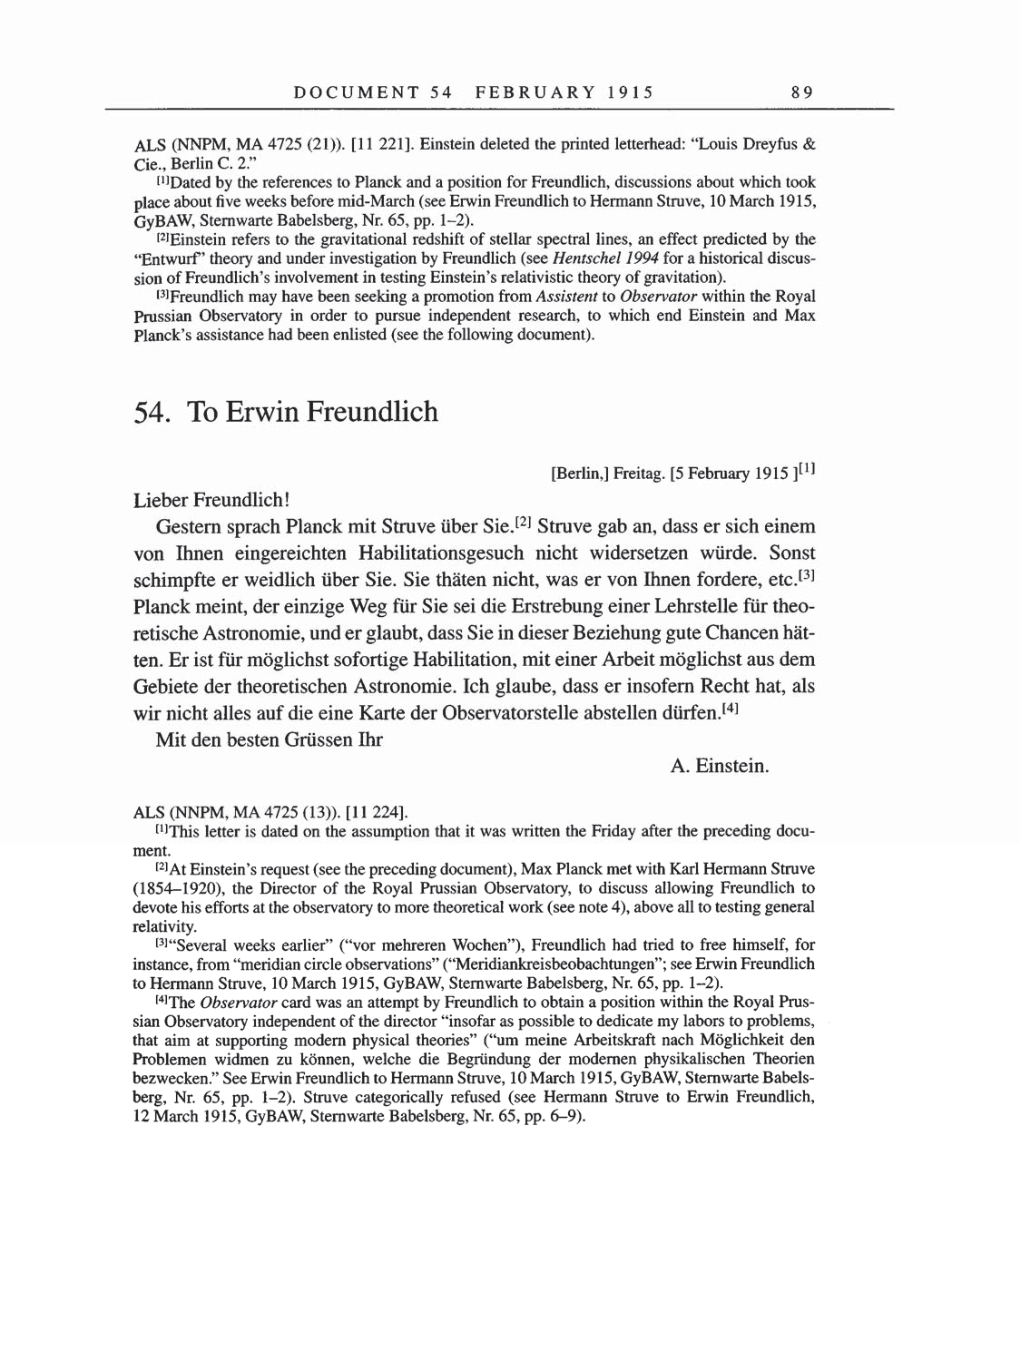 Volume 8, Part A: The Berlin Years: Correspondence 1914-1917 page 89